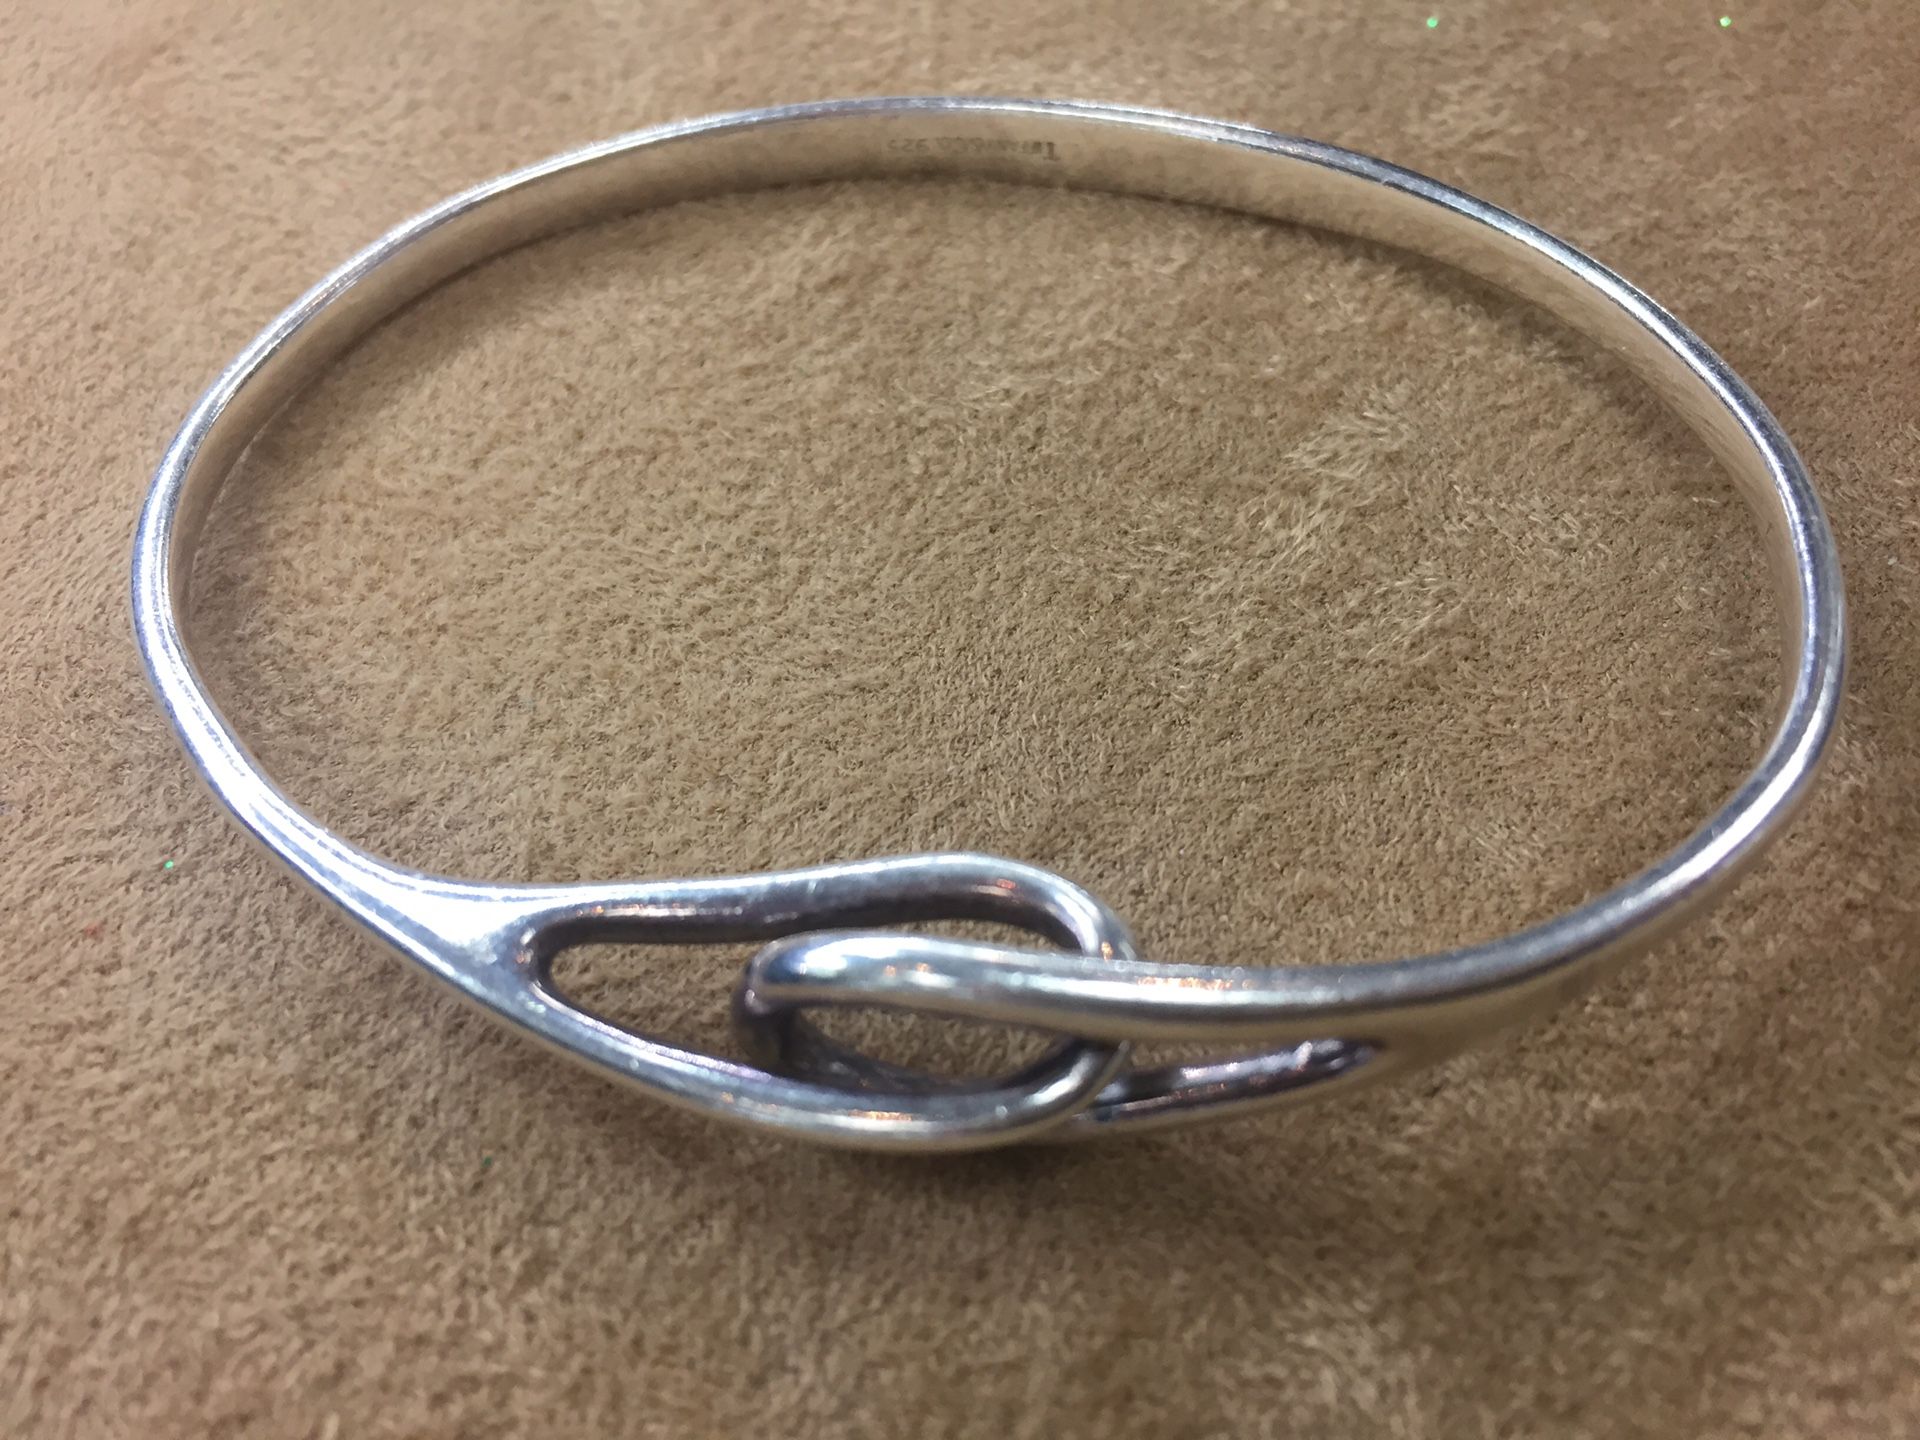 AUTHENTIC TIFFANY AND CO. SILVER INFINITY INTERLOKING LOVE BANGLE BRACELET RARE VINTAGE